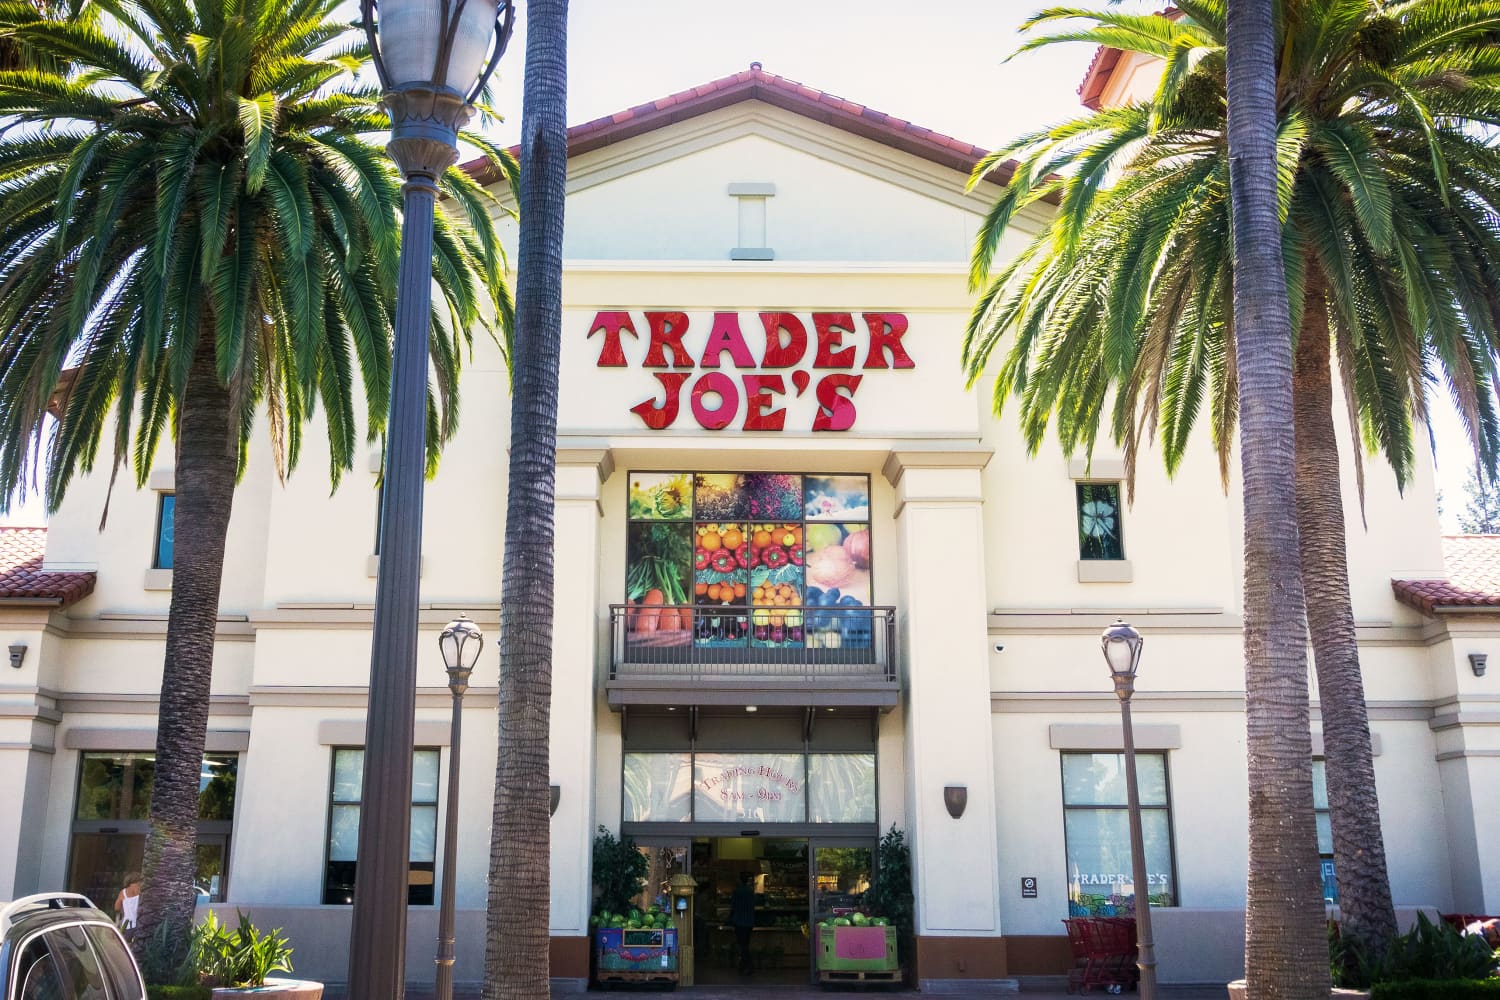 Here's What Trader Joe's Does With Their Location Request Form